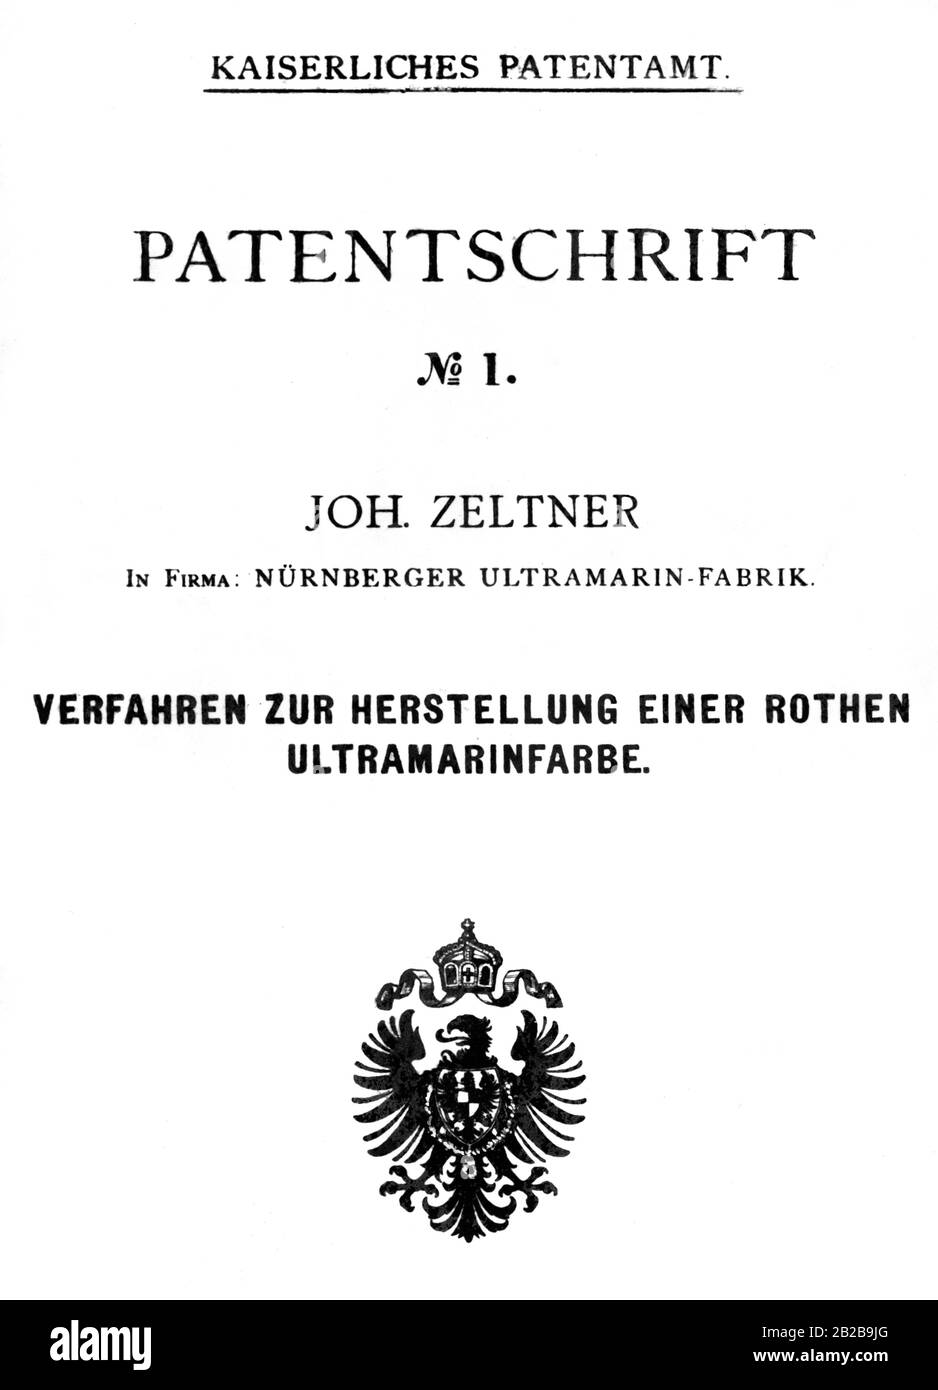 Copy of Johann Zeltner's patent specification from the Imperial Patent Office for the process of producing a red ultramarine paint for the Nuremberg ultramarine factory. It is the first patent document issued by the Patent Office on the basis of the Imperial Patent Act which came into force on 01.07.1877. Stock Photo